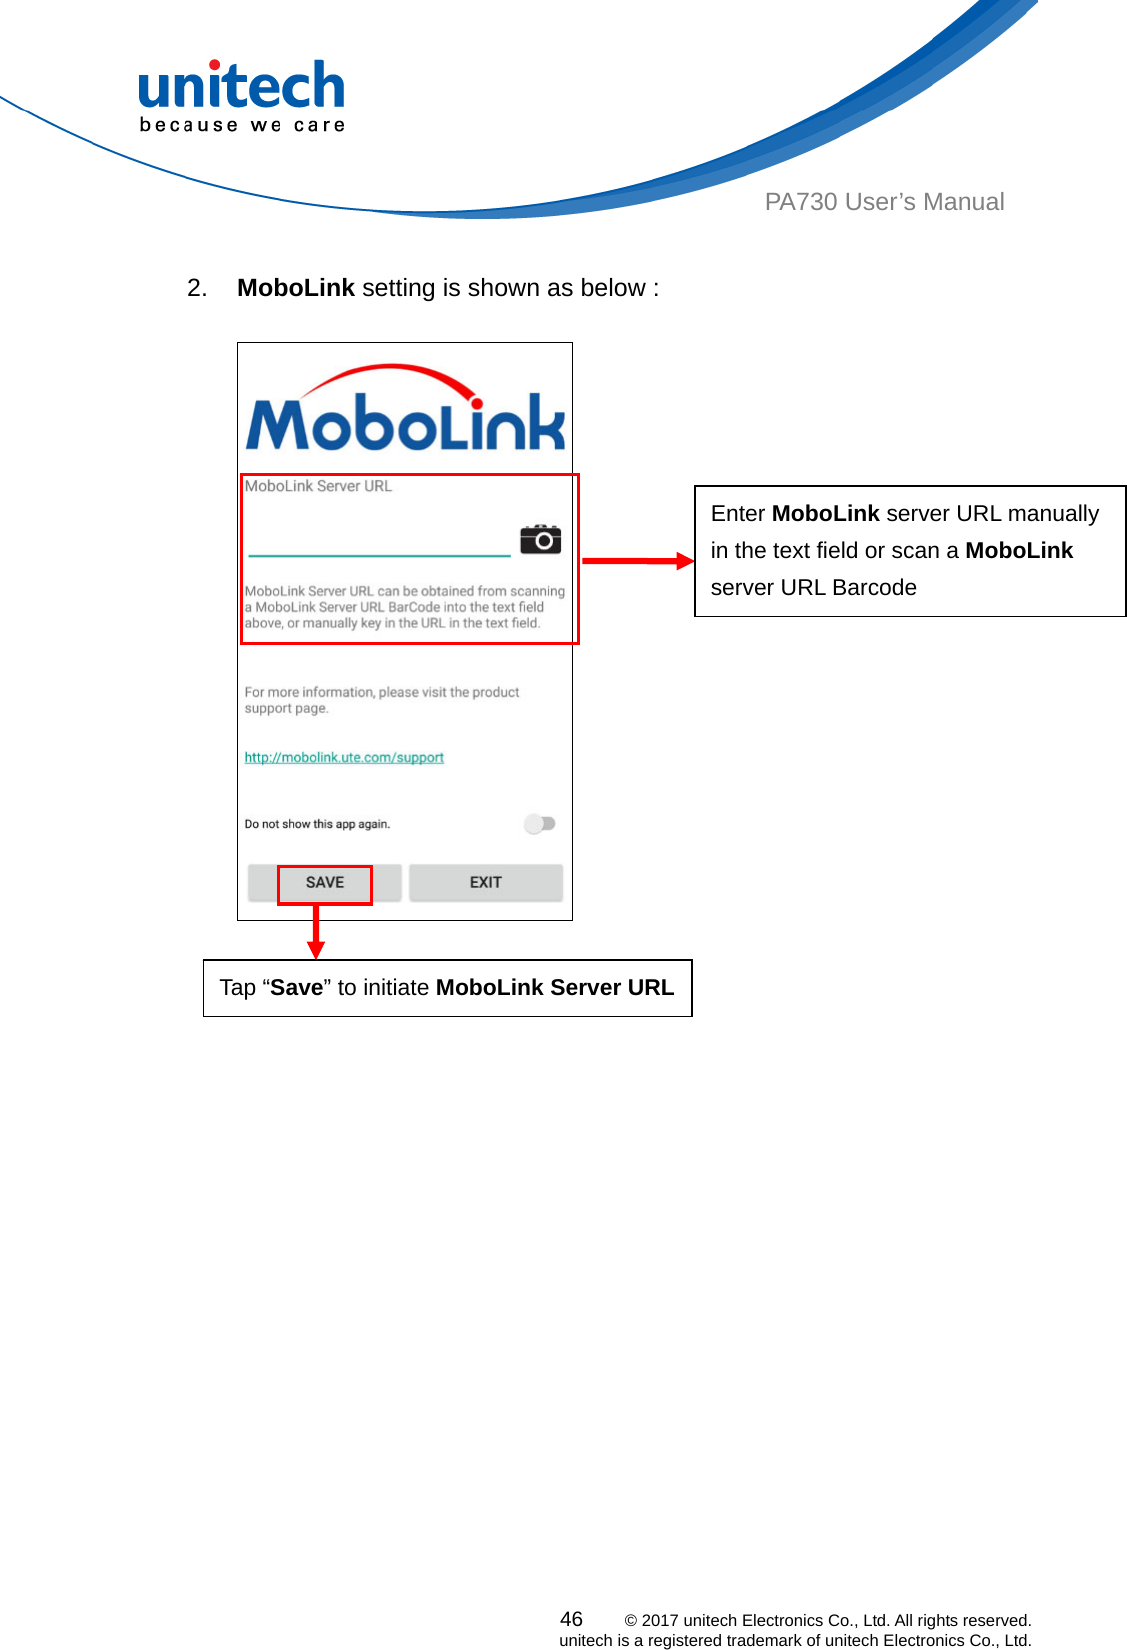  PA730 User’s Manual  2.  MoboLink setting is shown as below :  Enter MoboLink server URL manually in the text field or scan a MoboLink server URL Barcode  46    © 2017 unitech Electronics Co., Ltd. All rights reserved.   unitech is a registered trademark of unitech Electronics Co., Ltd.    Tap “Save” to initiate MoboLink Server URL